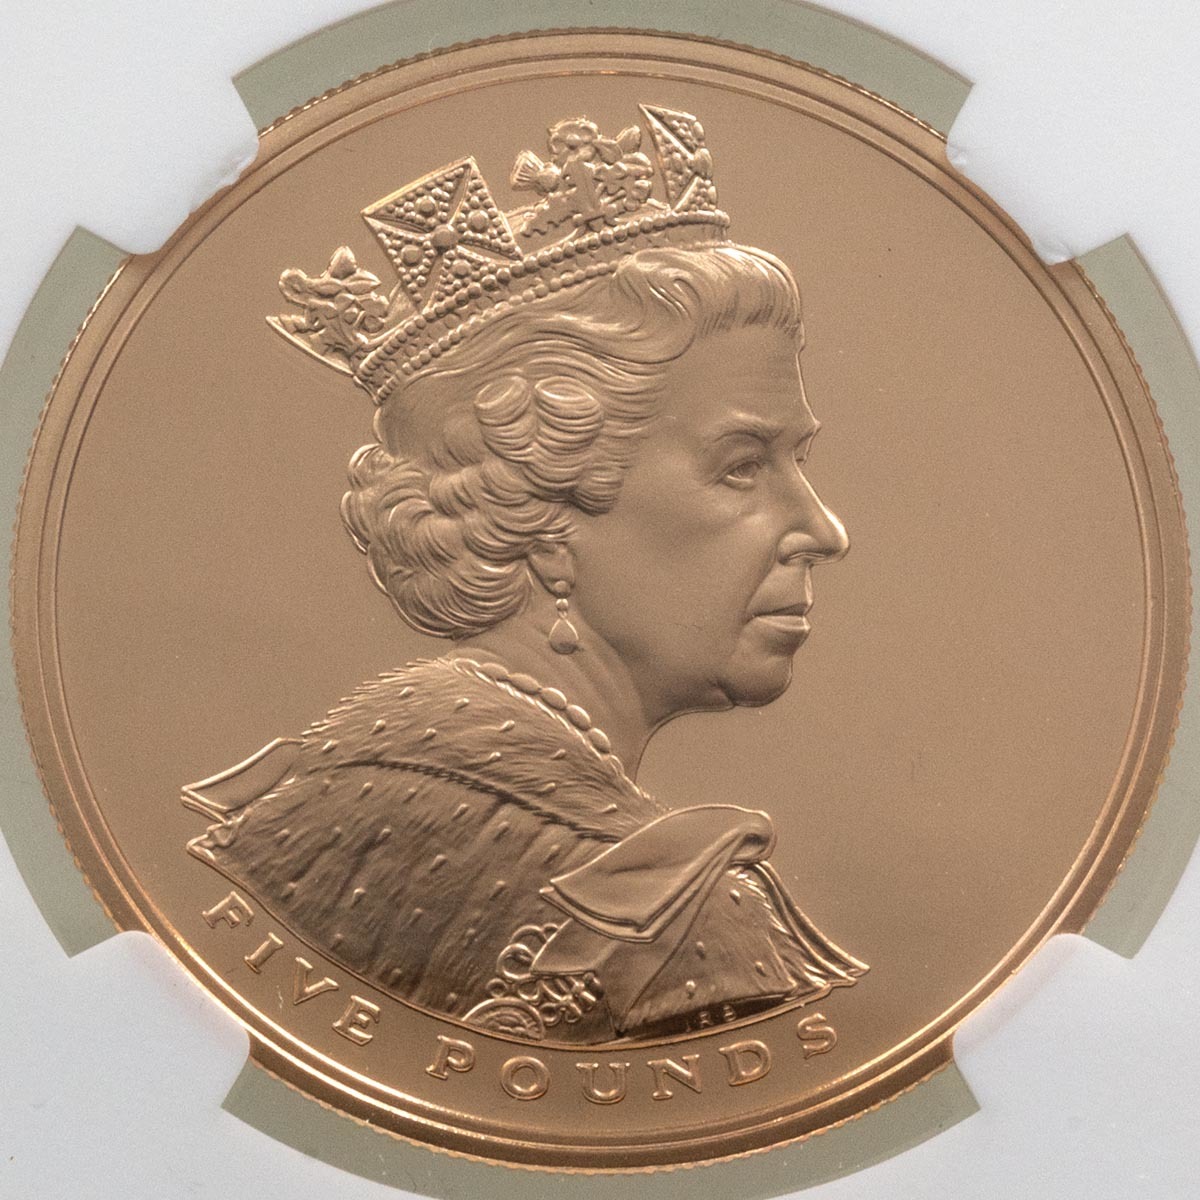 2002 Queen Elizabeth II's Golden Jubilee Five Pound Crown Gold Proof Coin NGC Graded PF 70 Ultra Cameo Portrait Bust